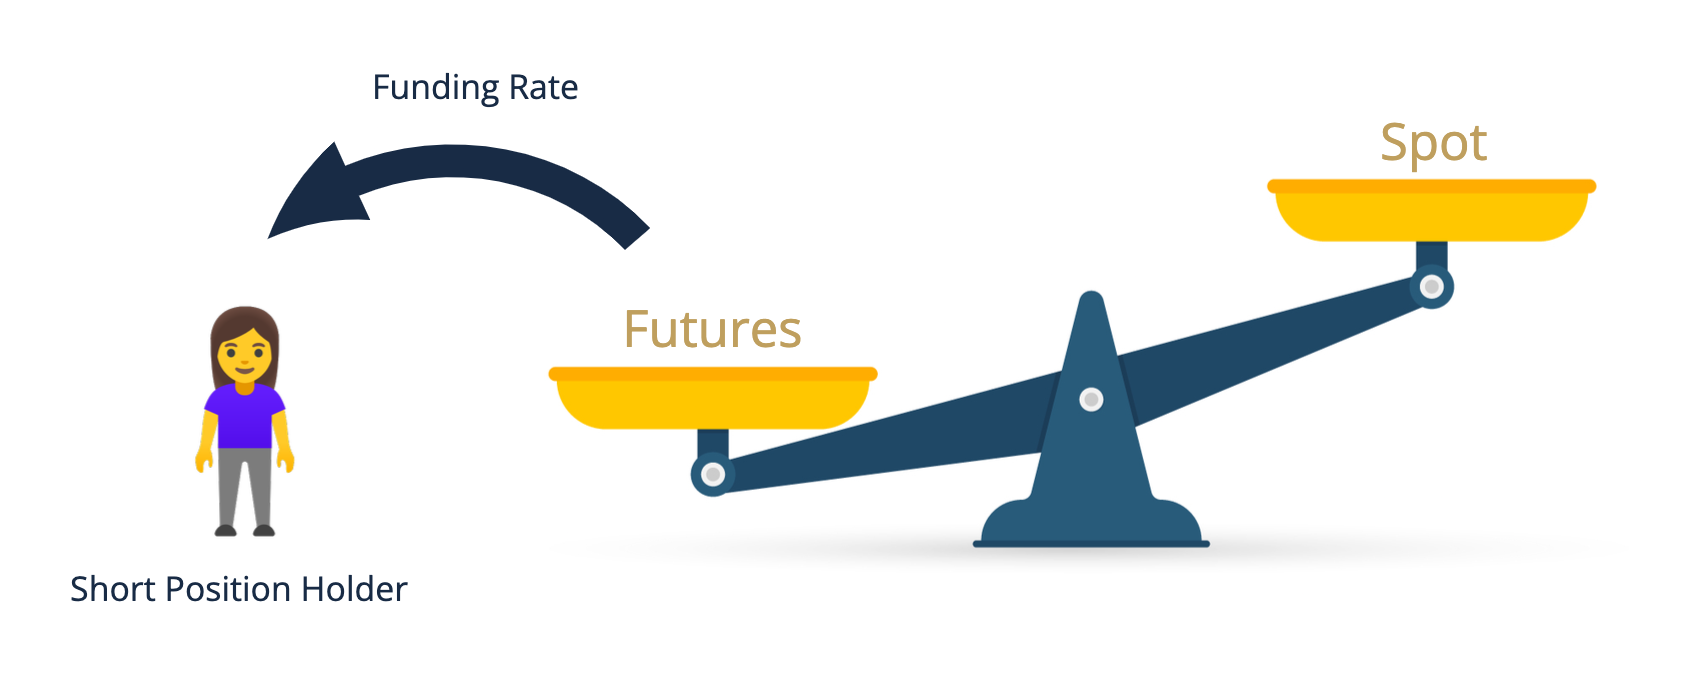 Illustration of a scale with futures and spot side. The futures side has much more weight. For this reason, an arrow with the label «Funding Rate» points from Futures to «Short Position Holder». Thus, the funding rate transfer takes weight away from the futures side.